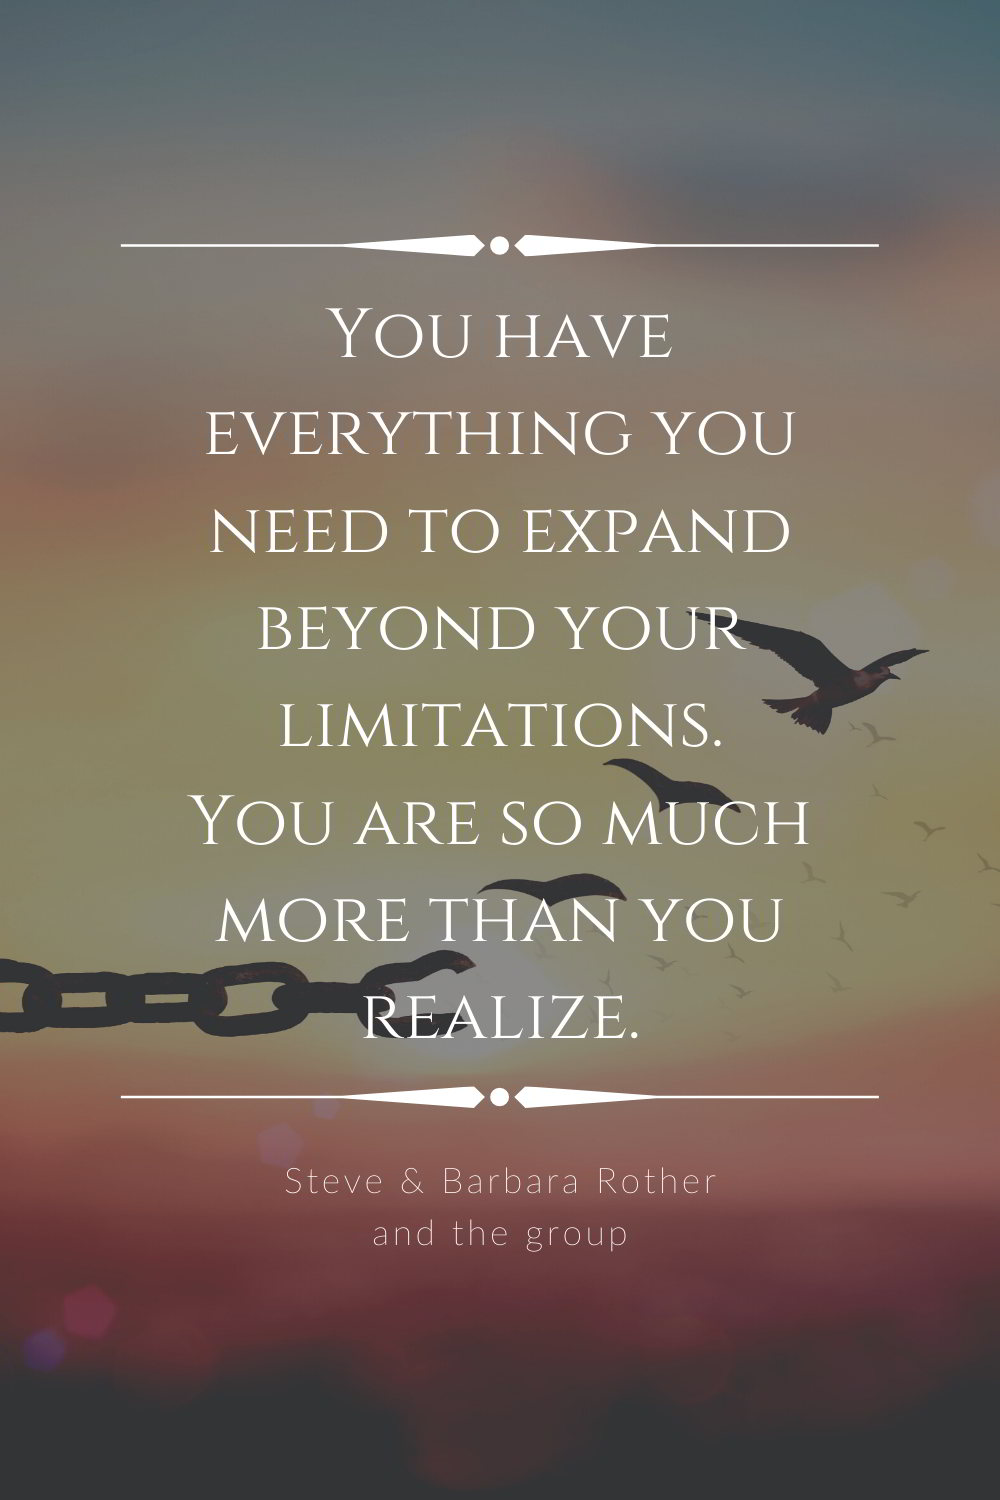 You have everything you need to expand beyond your limitations